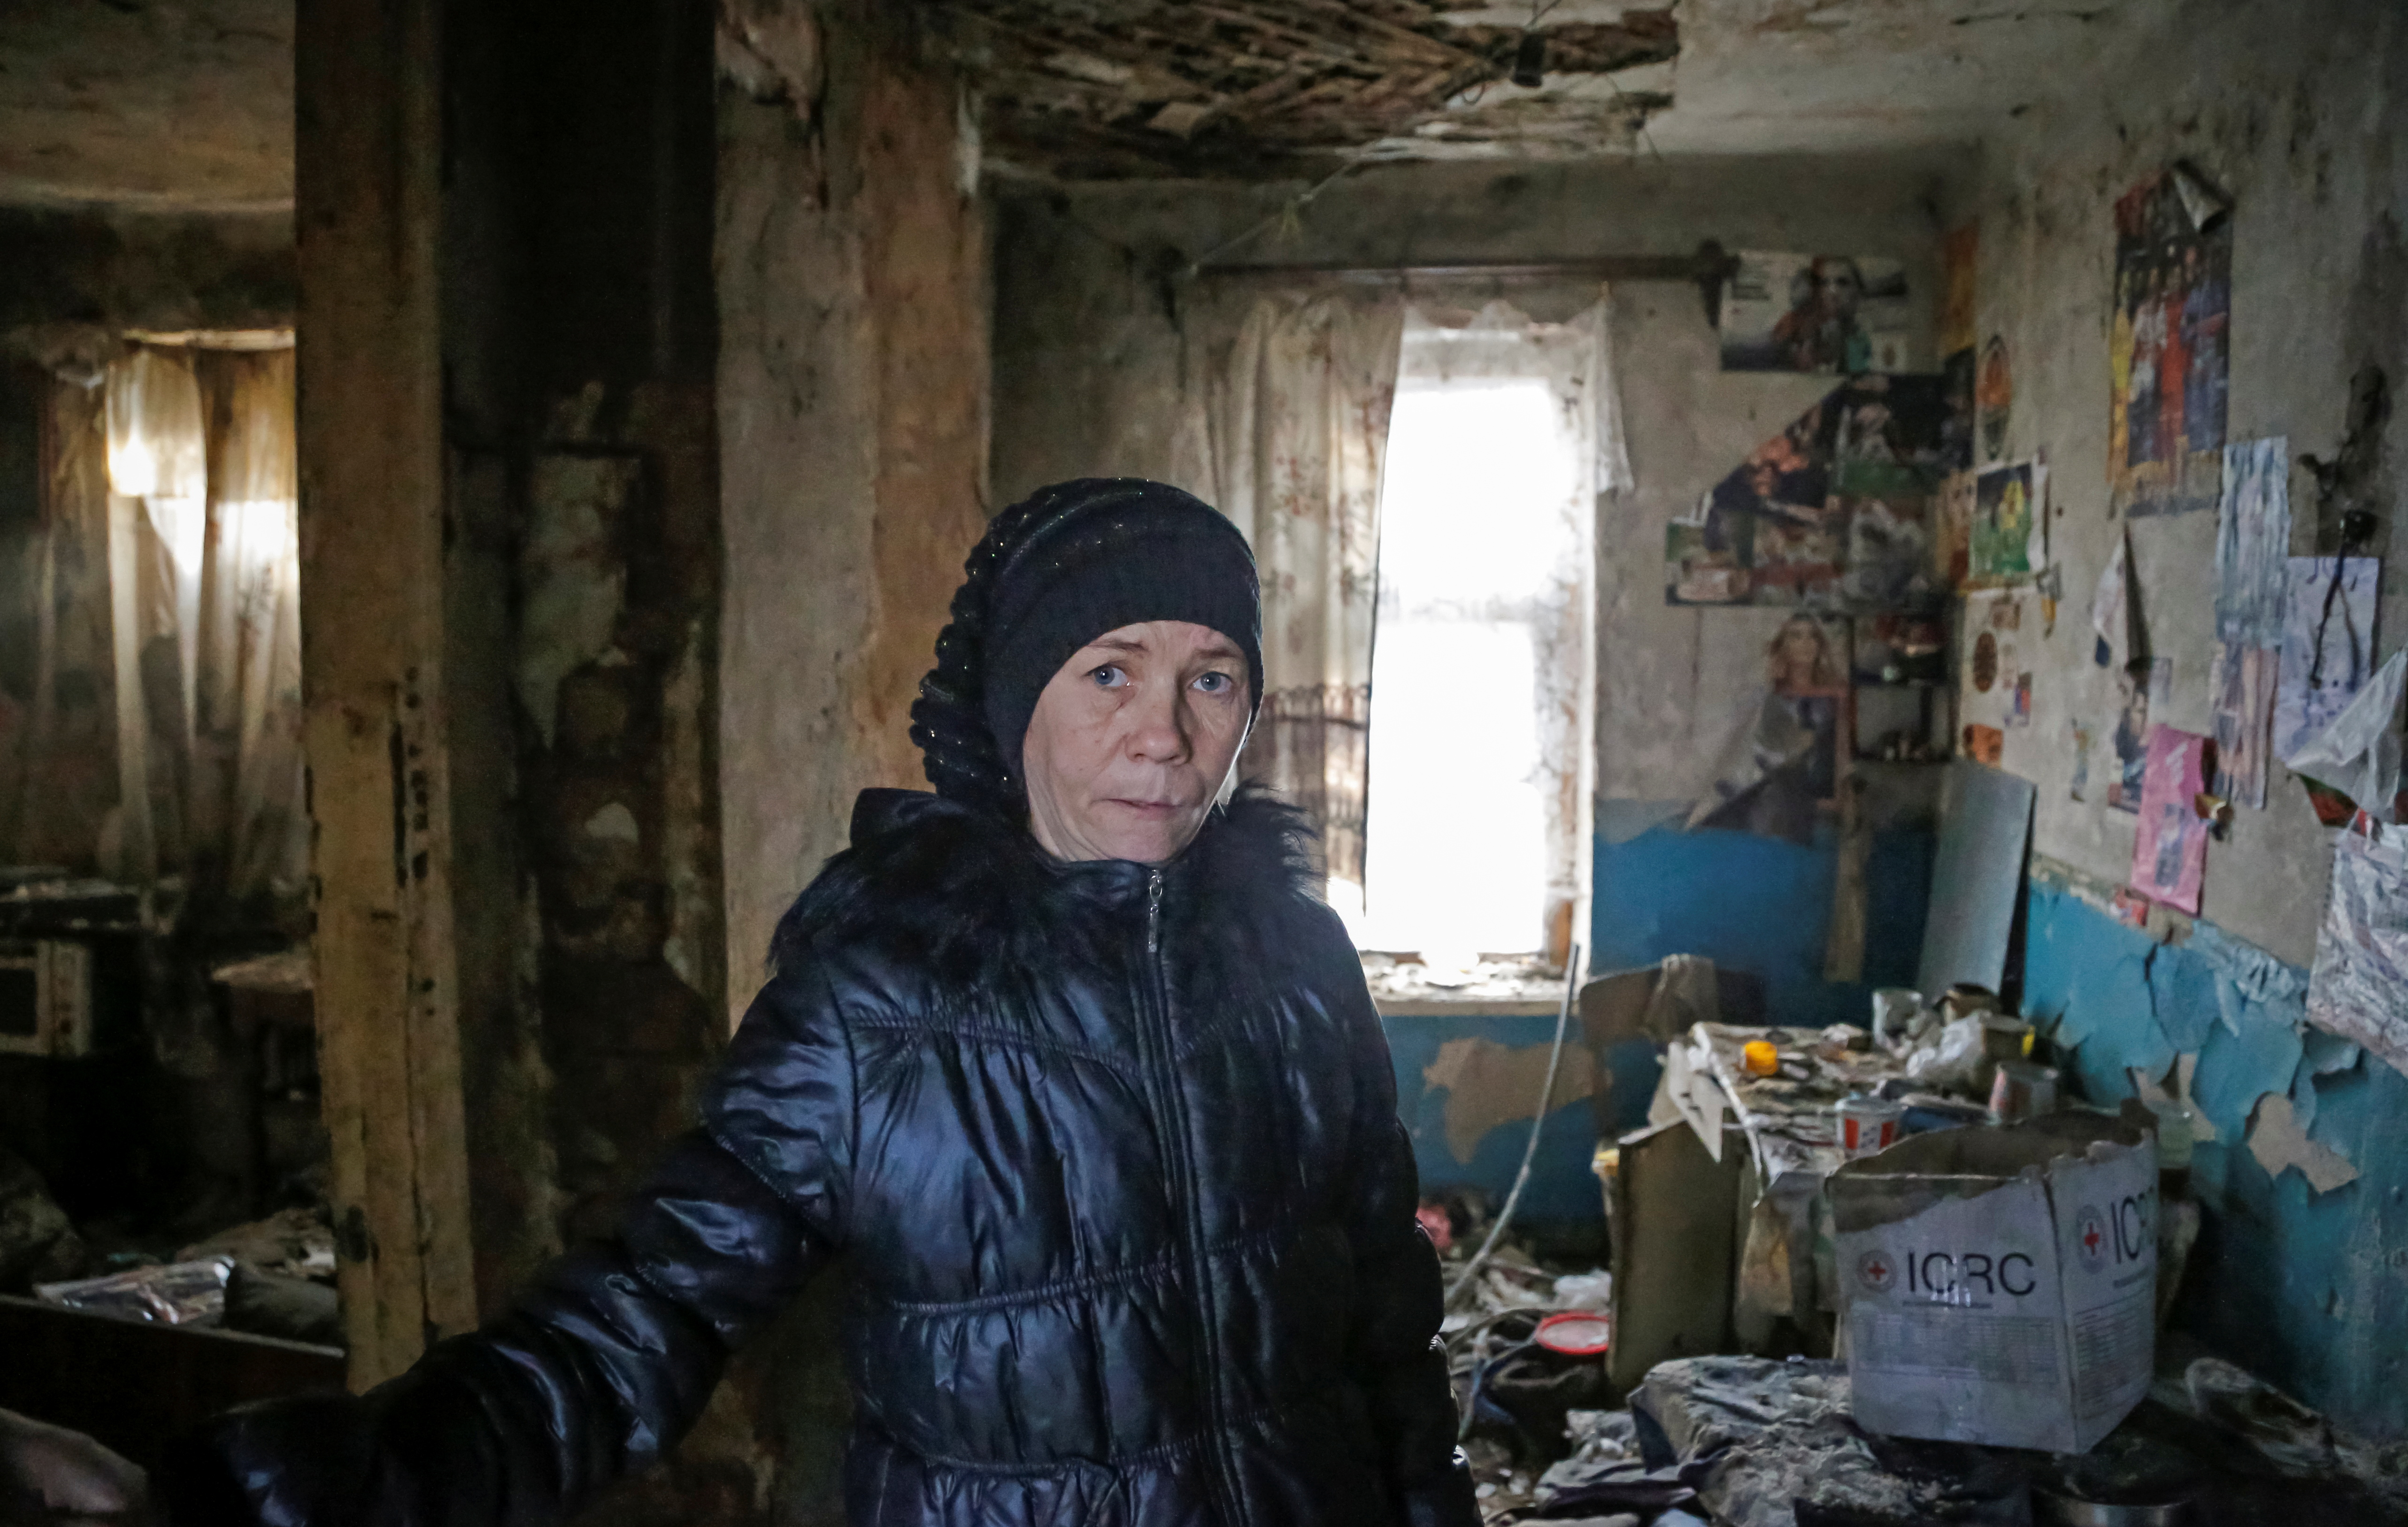 Local resident Irina Studenikina poses inside her house, which was damaged by shelling, in Horlivka